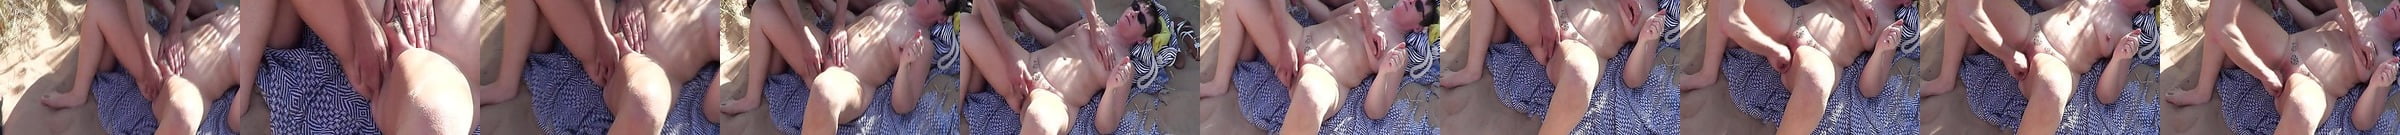 Old Lady And Wanker On The Maspalomas Beach Free Porn 89 Nl